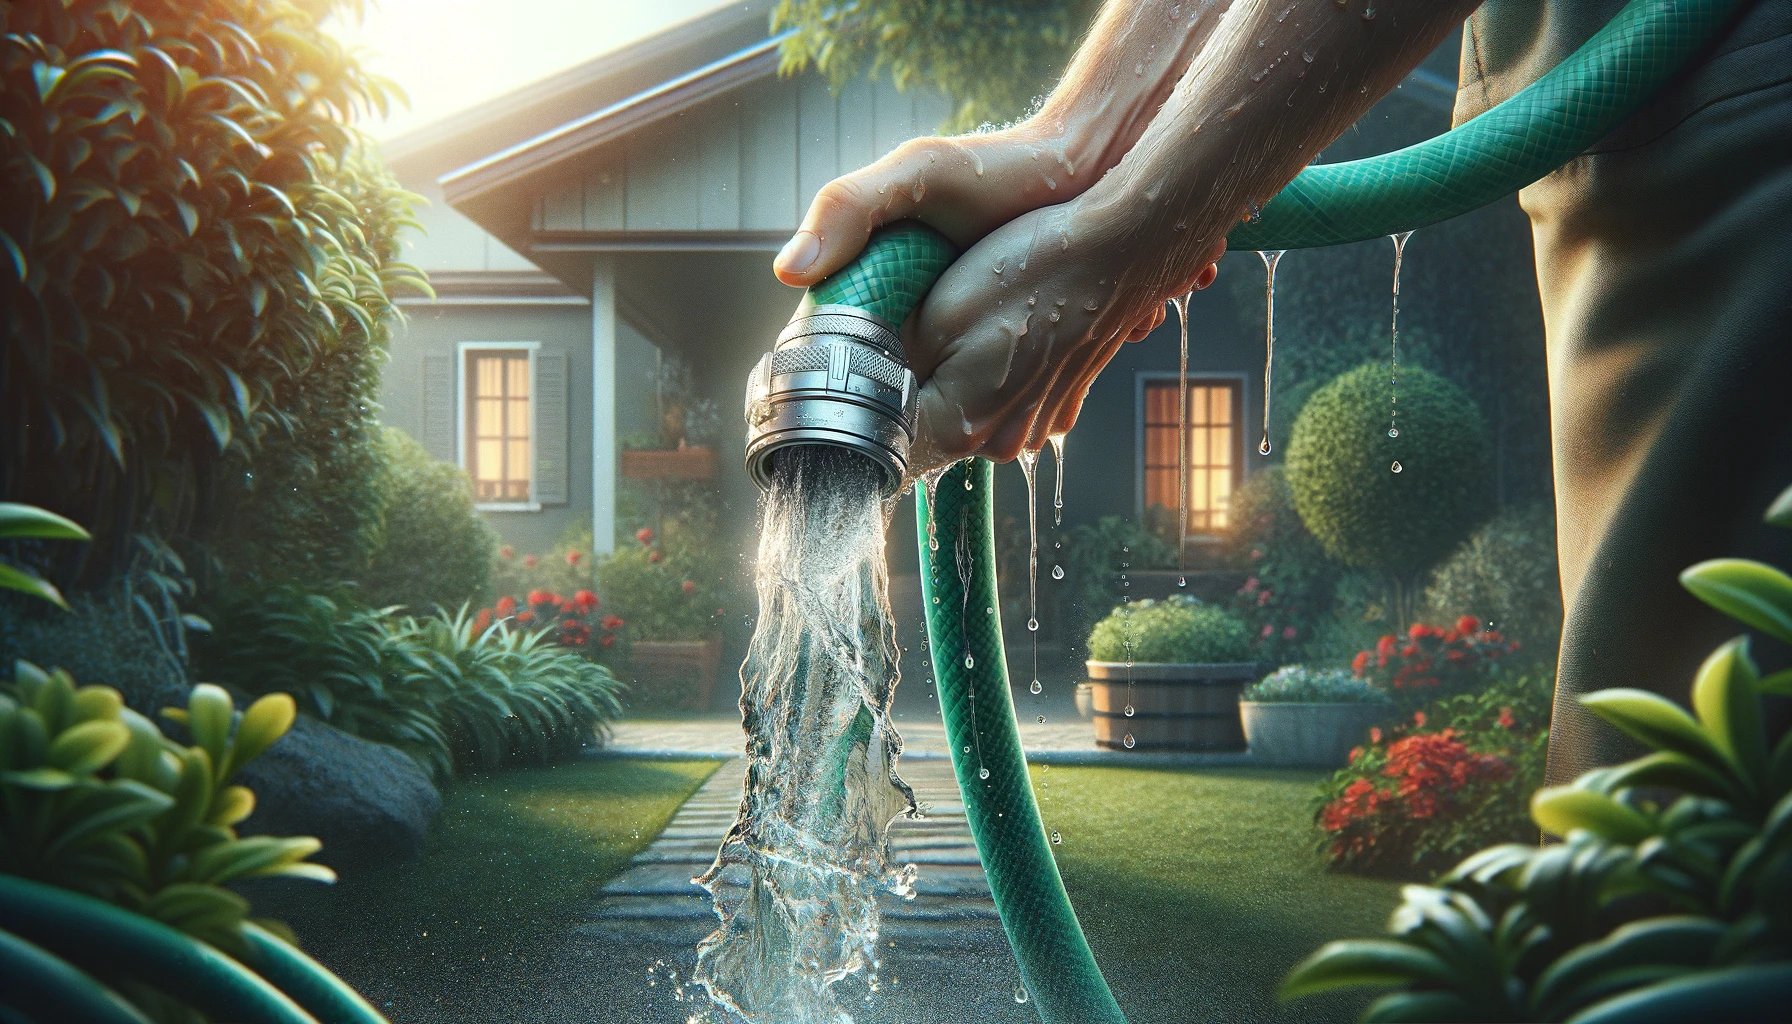 DALL·E 2024-04-26 11.39.17 - Create a realistic digital banner, 1792x1024, focusing on a close-up of a garden hose as it spills the last few drops of water. The scene should depic